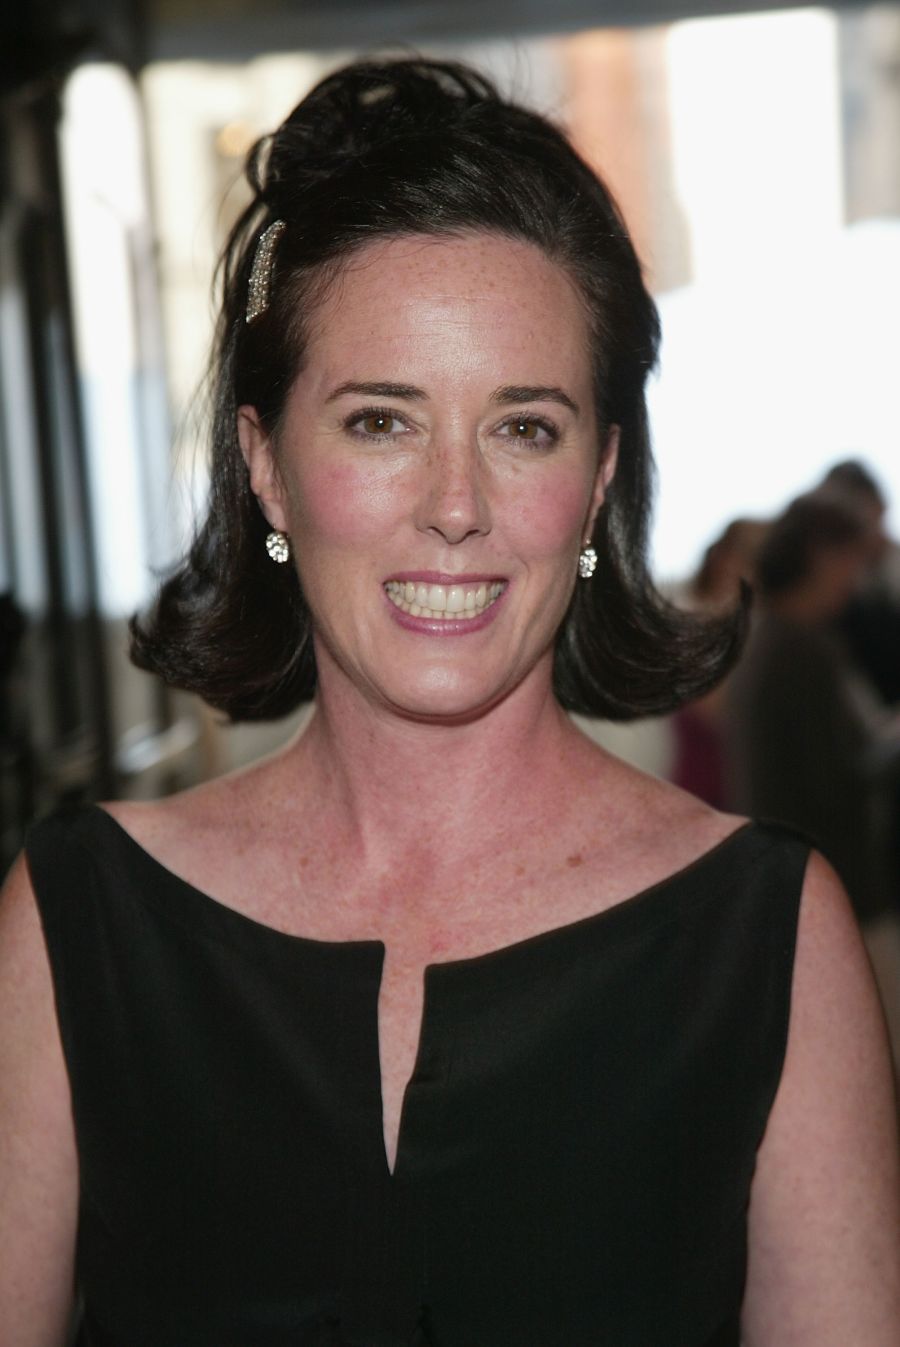 Designer Kate Spade found dead in apparent suicide Houston Style